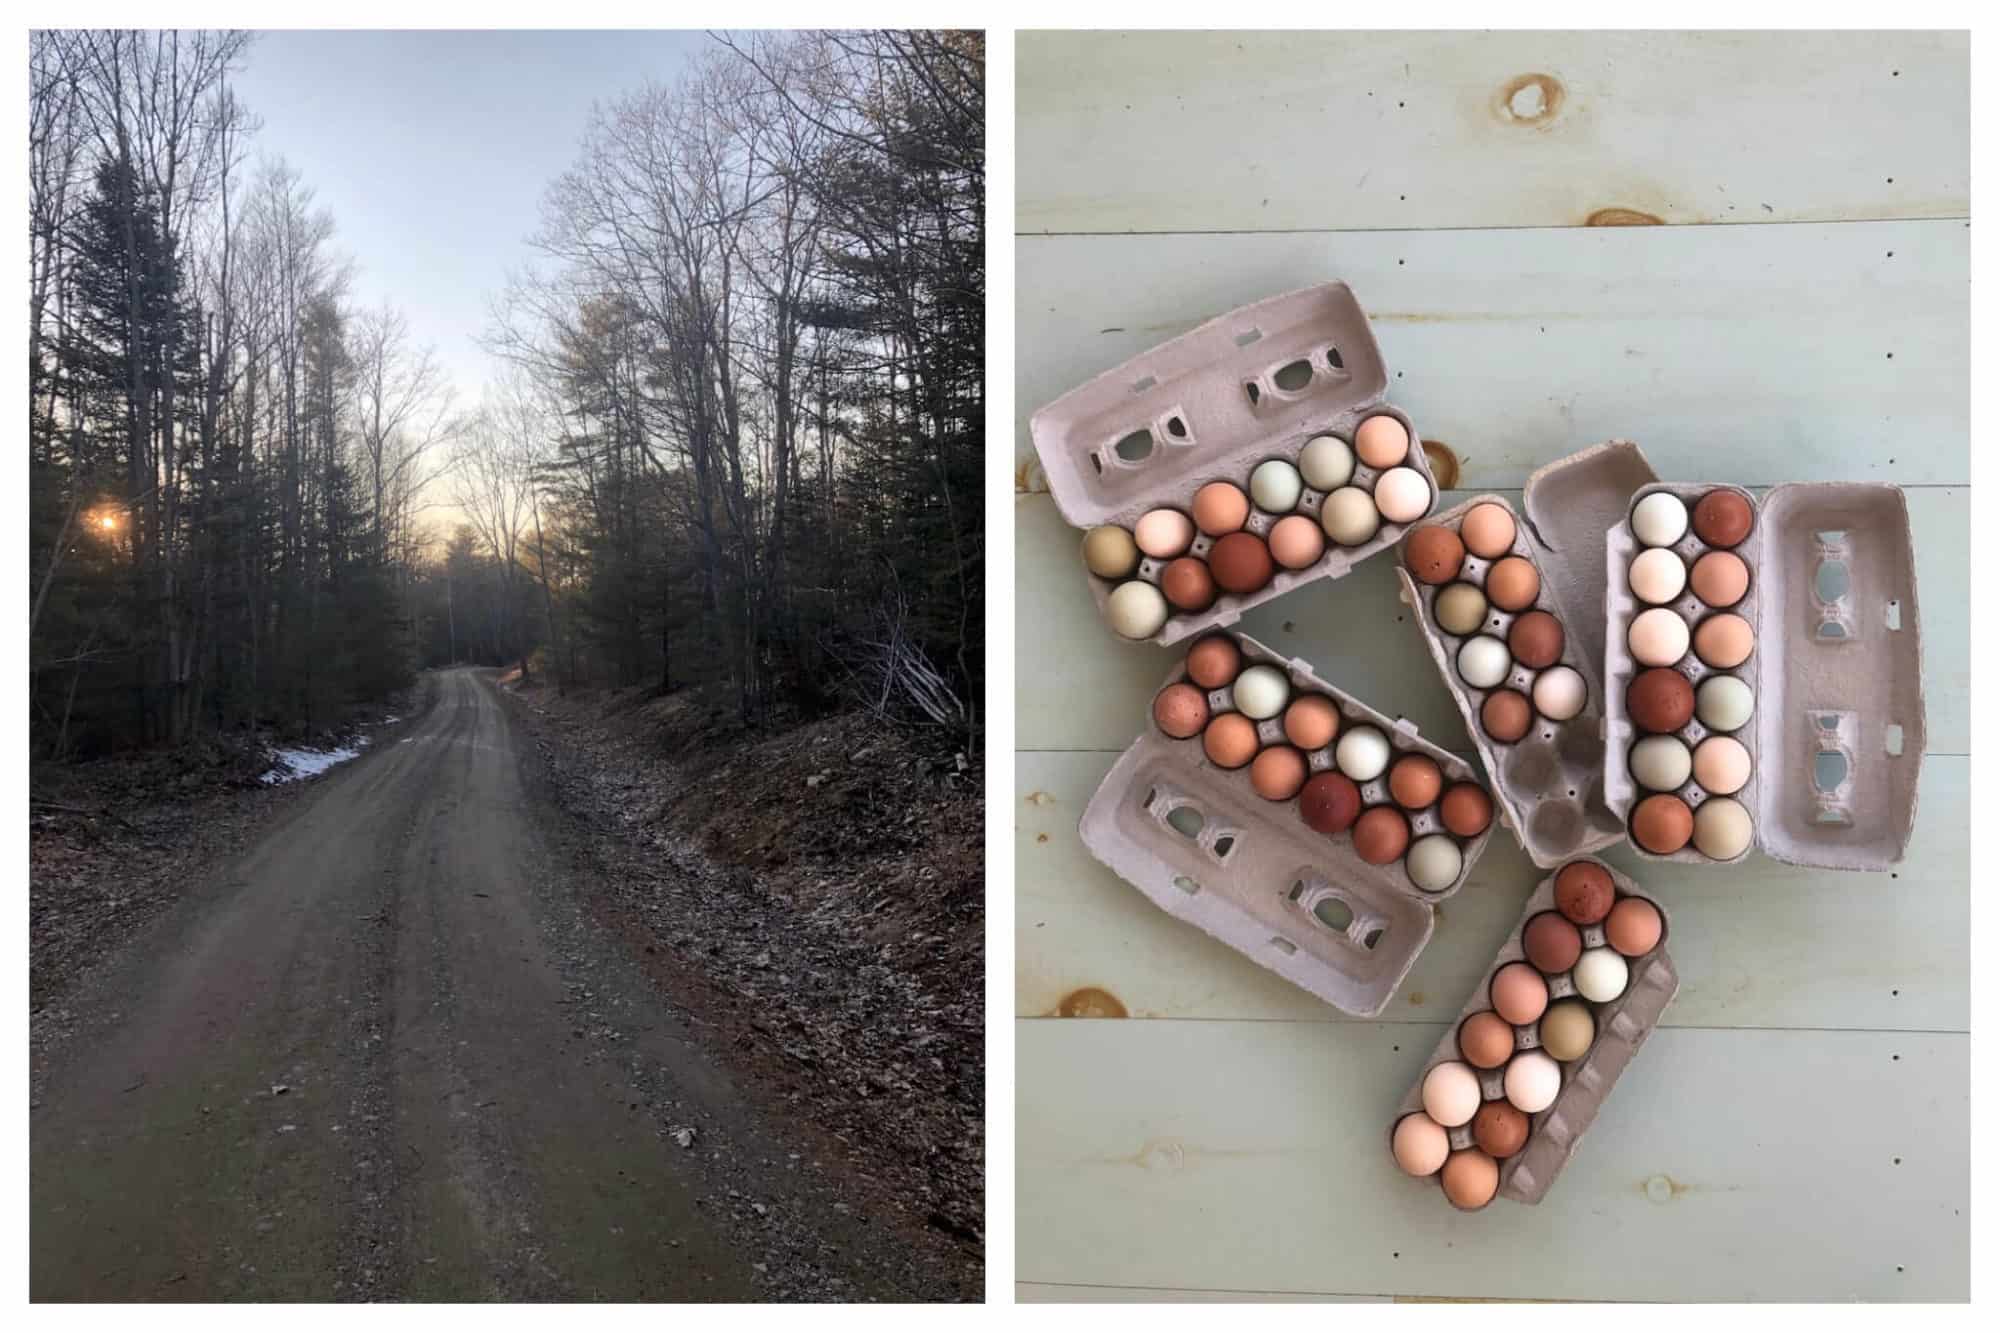 Left: A path in the woods near Erica's Maine farm.
Right: Dozens of multicolored, fresh eggs from Erica's chickens.